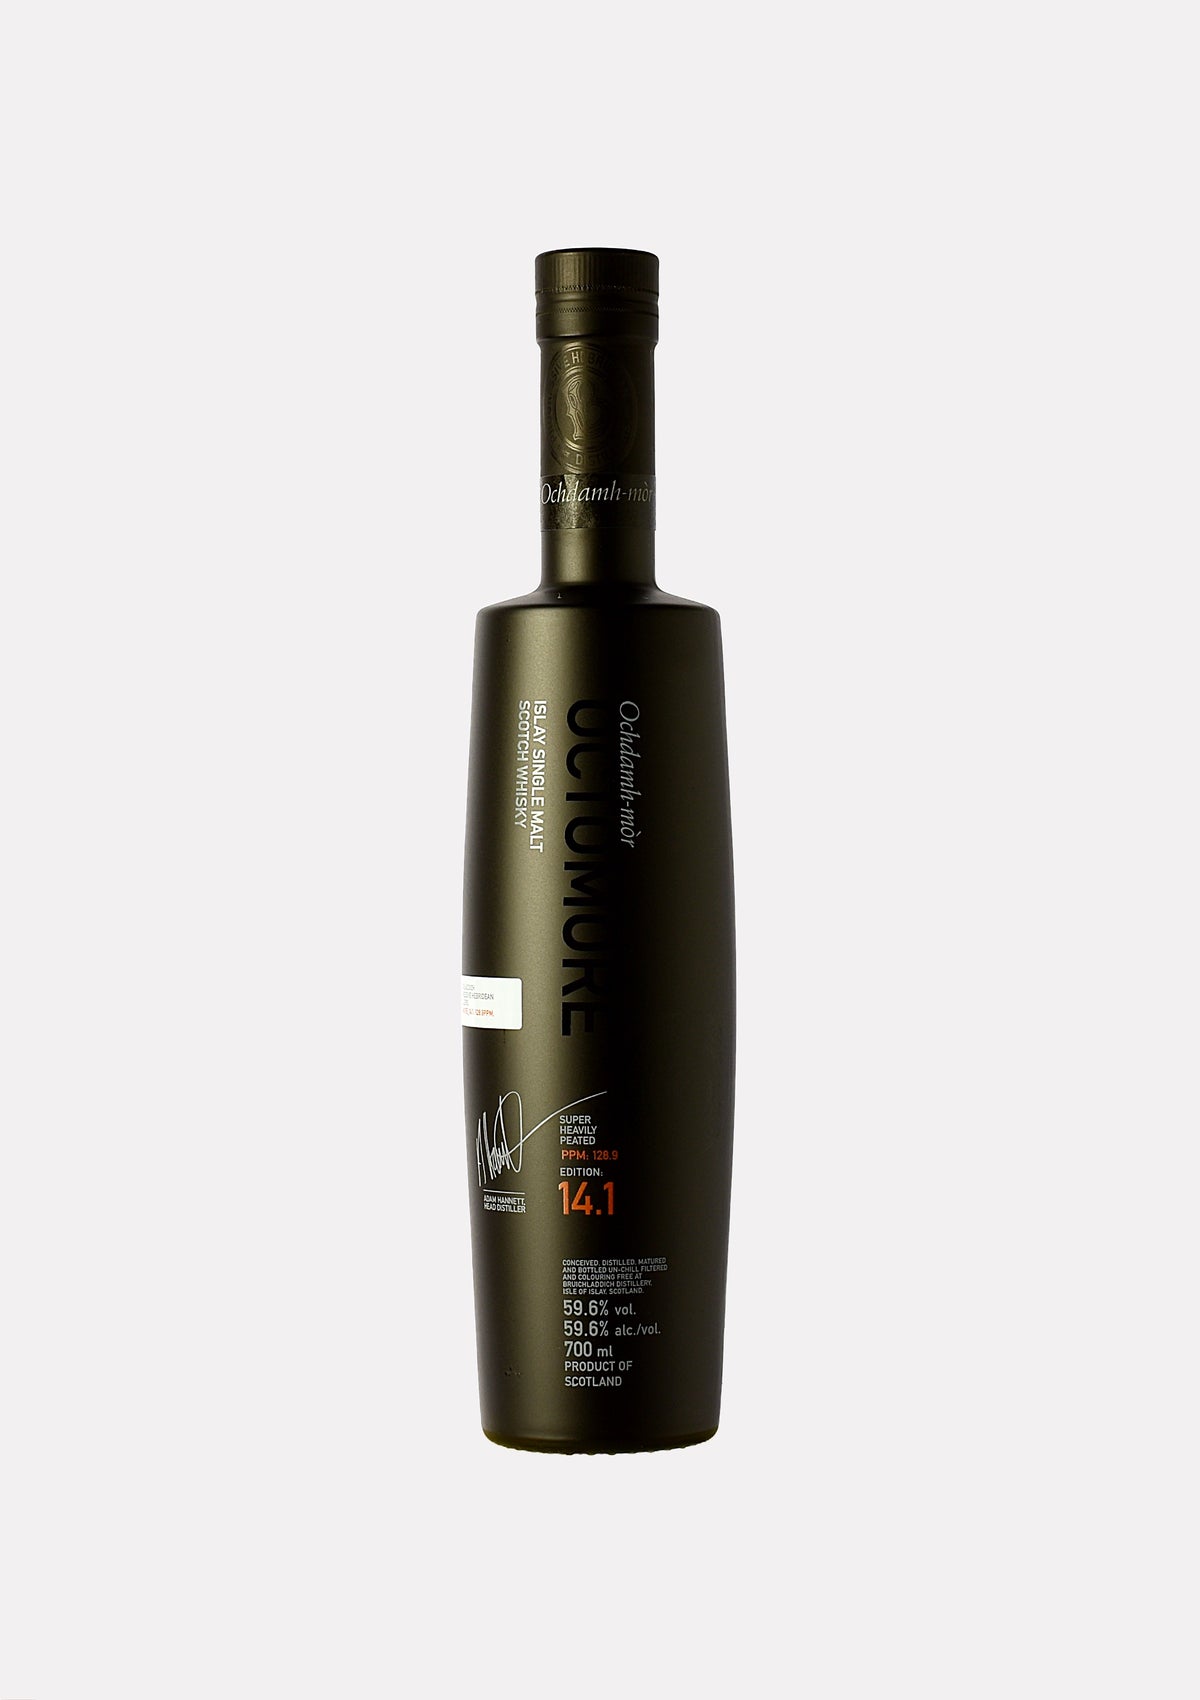 Octomore 14.1 128.9 ppm